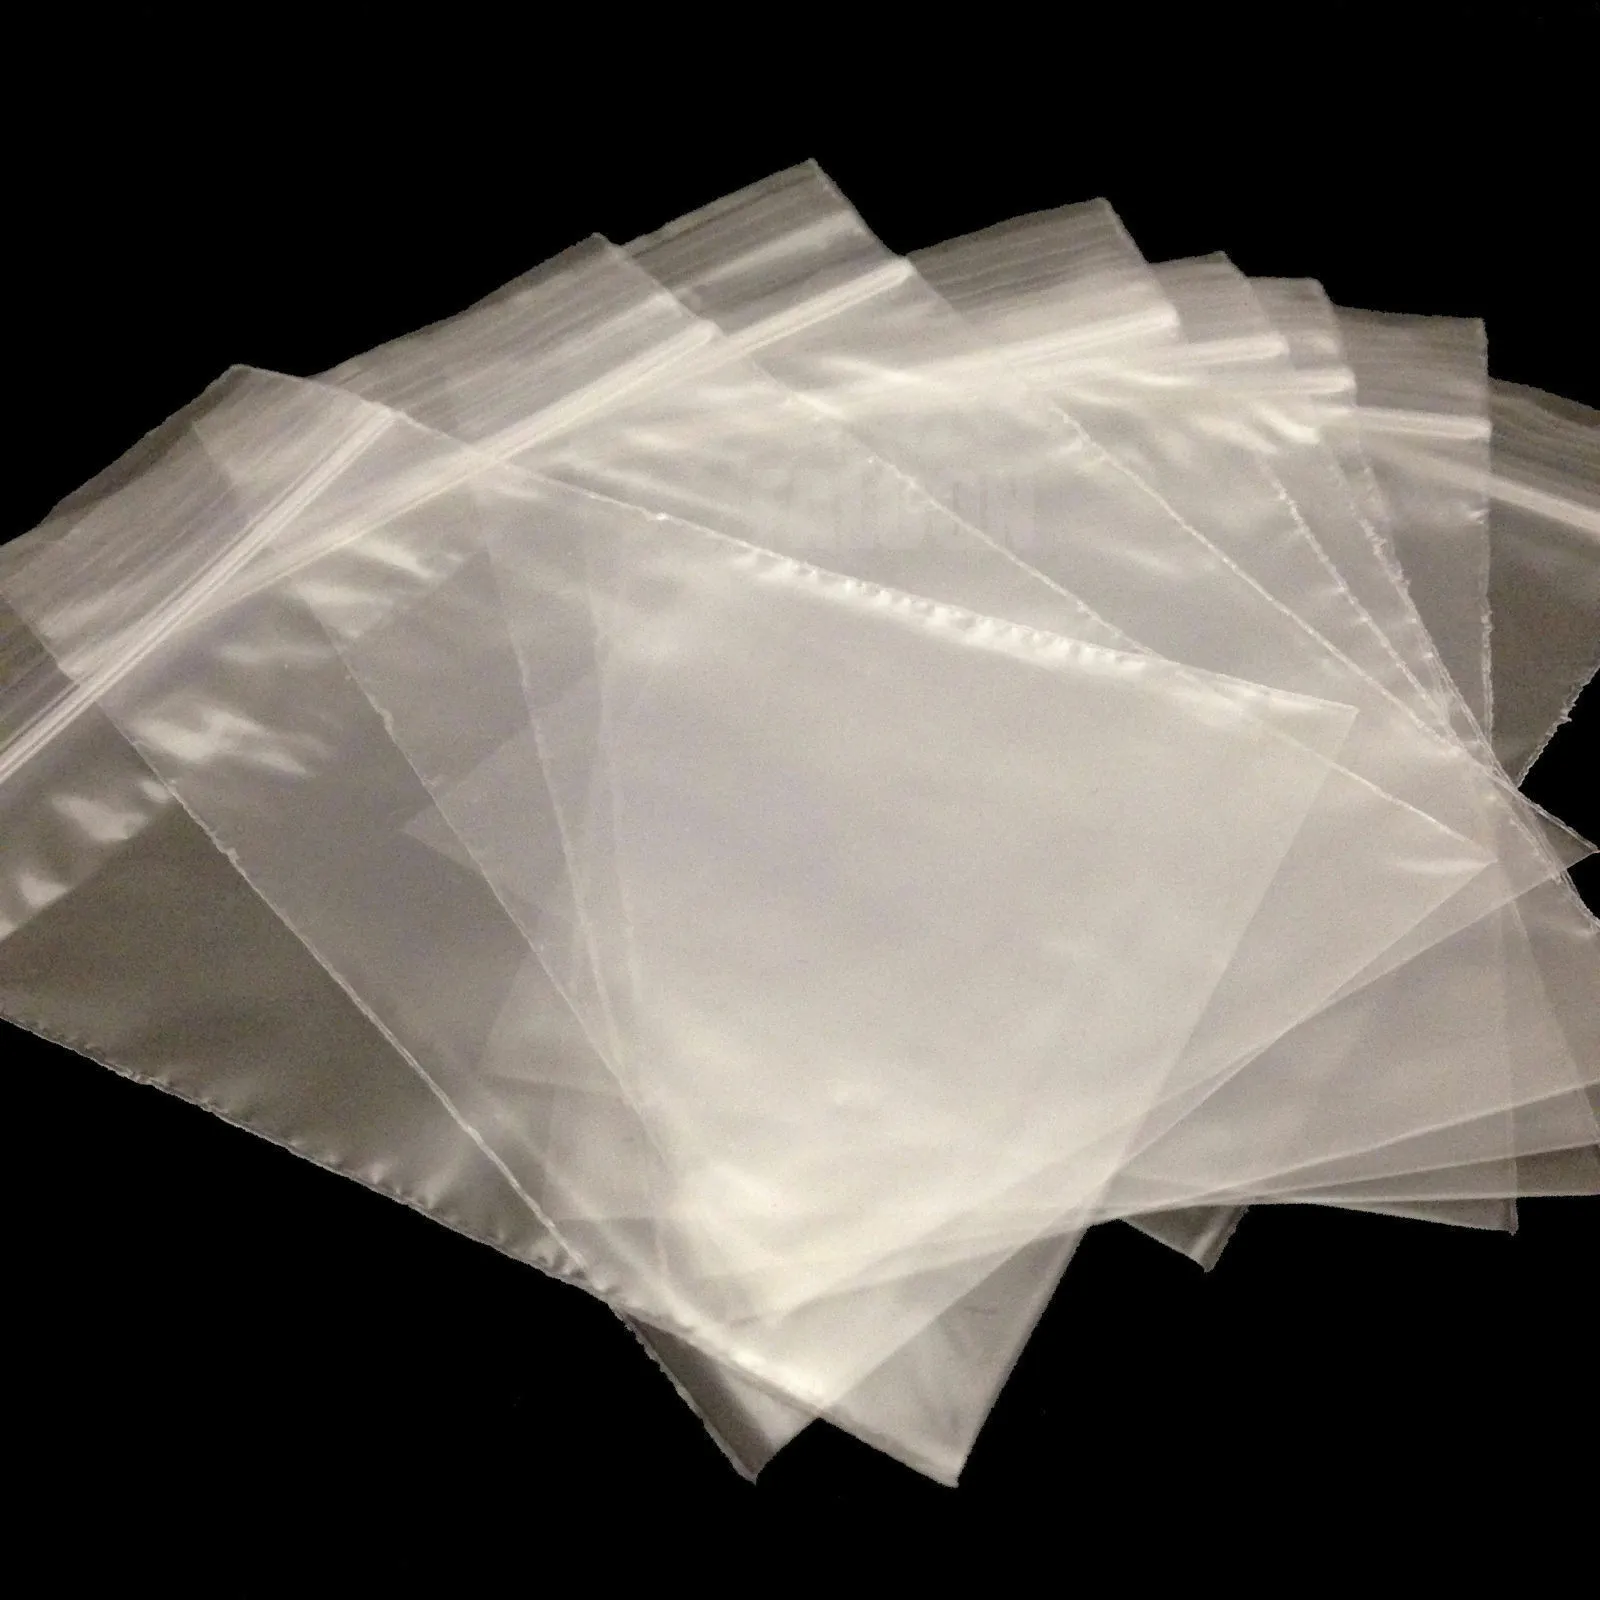 200  NEW 30mmx30mm Small Plastic Bags Baggy Grip Seal 30x30 mm Zip 3x3 cm 100 